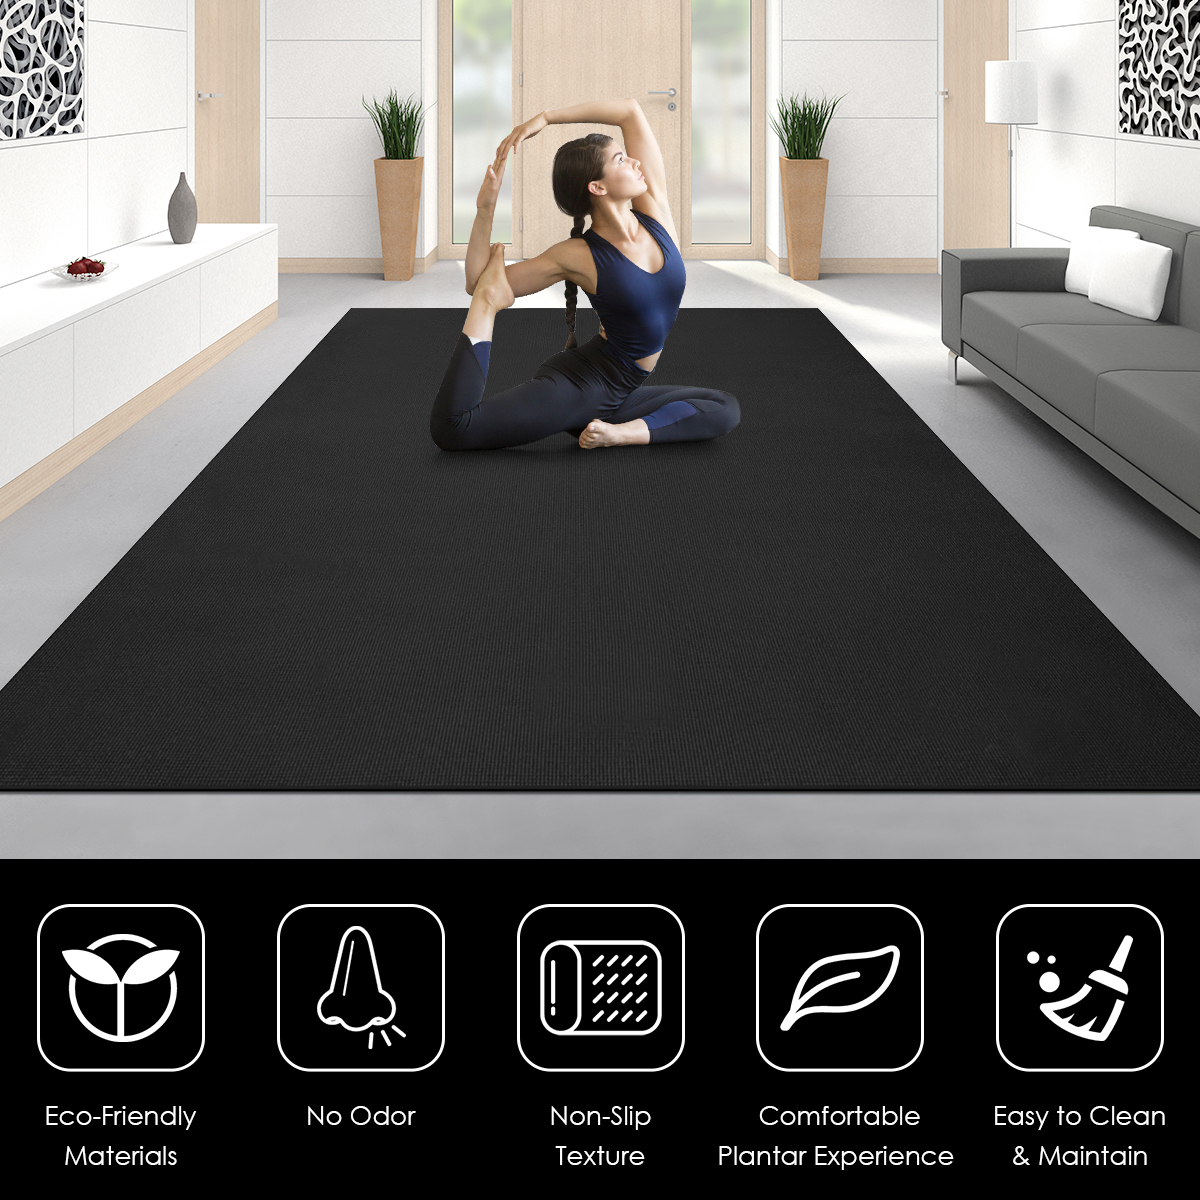 Costway Large Yoga Mat 6' x 4' x 8 mm Thick Workout Mats for Home Gym Flooring Black